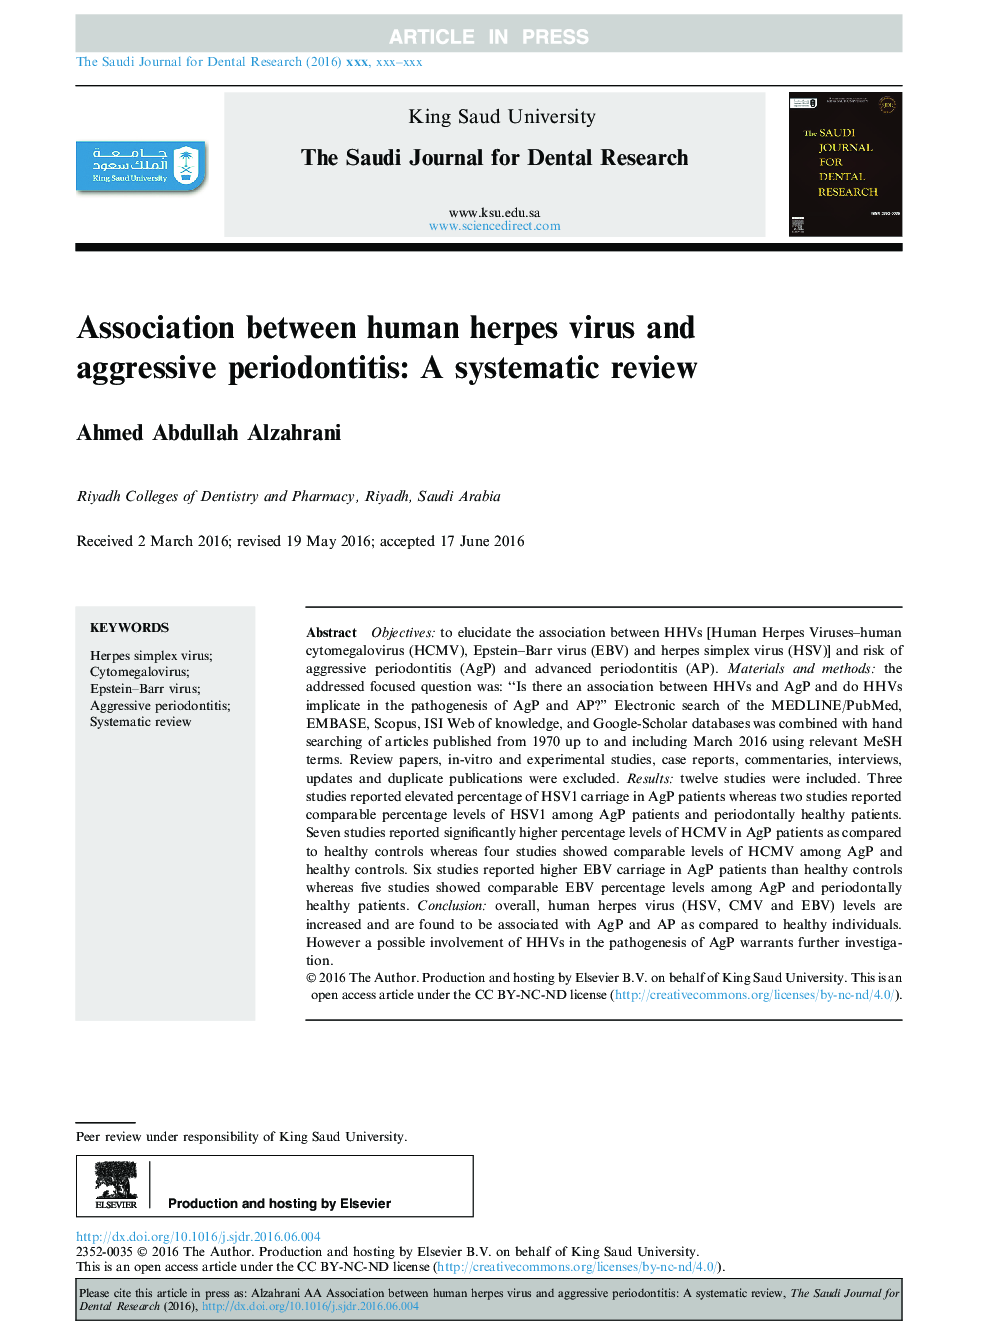 Association between human herpes virus and aggressive periodontitis: A systematic review